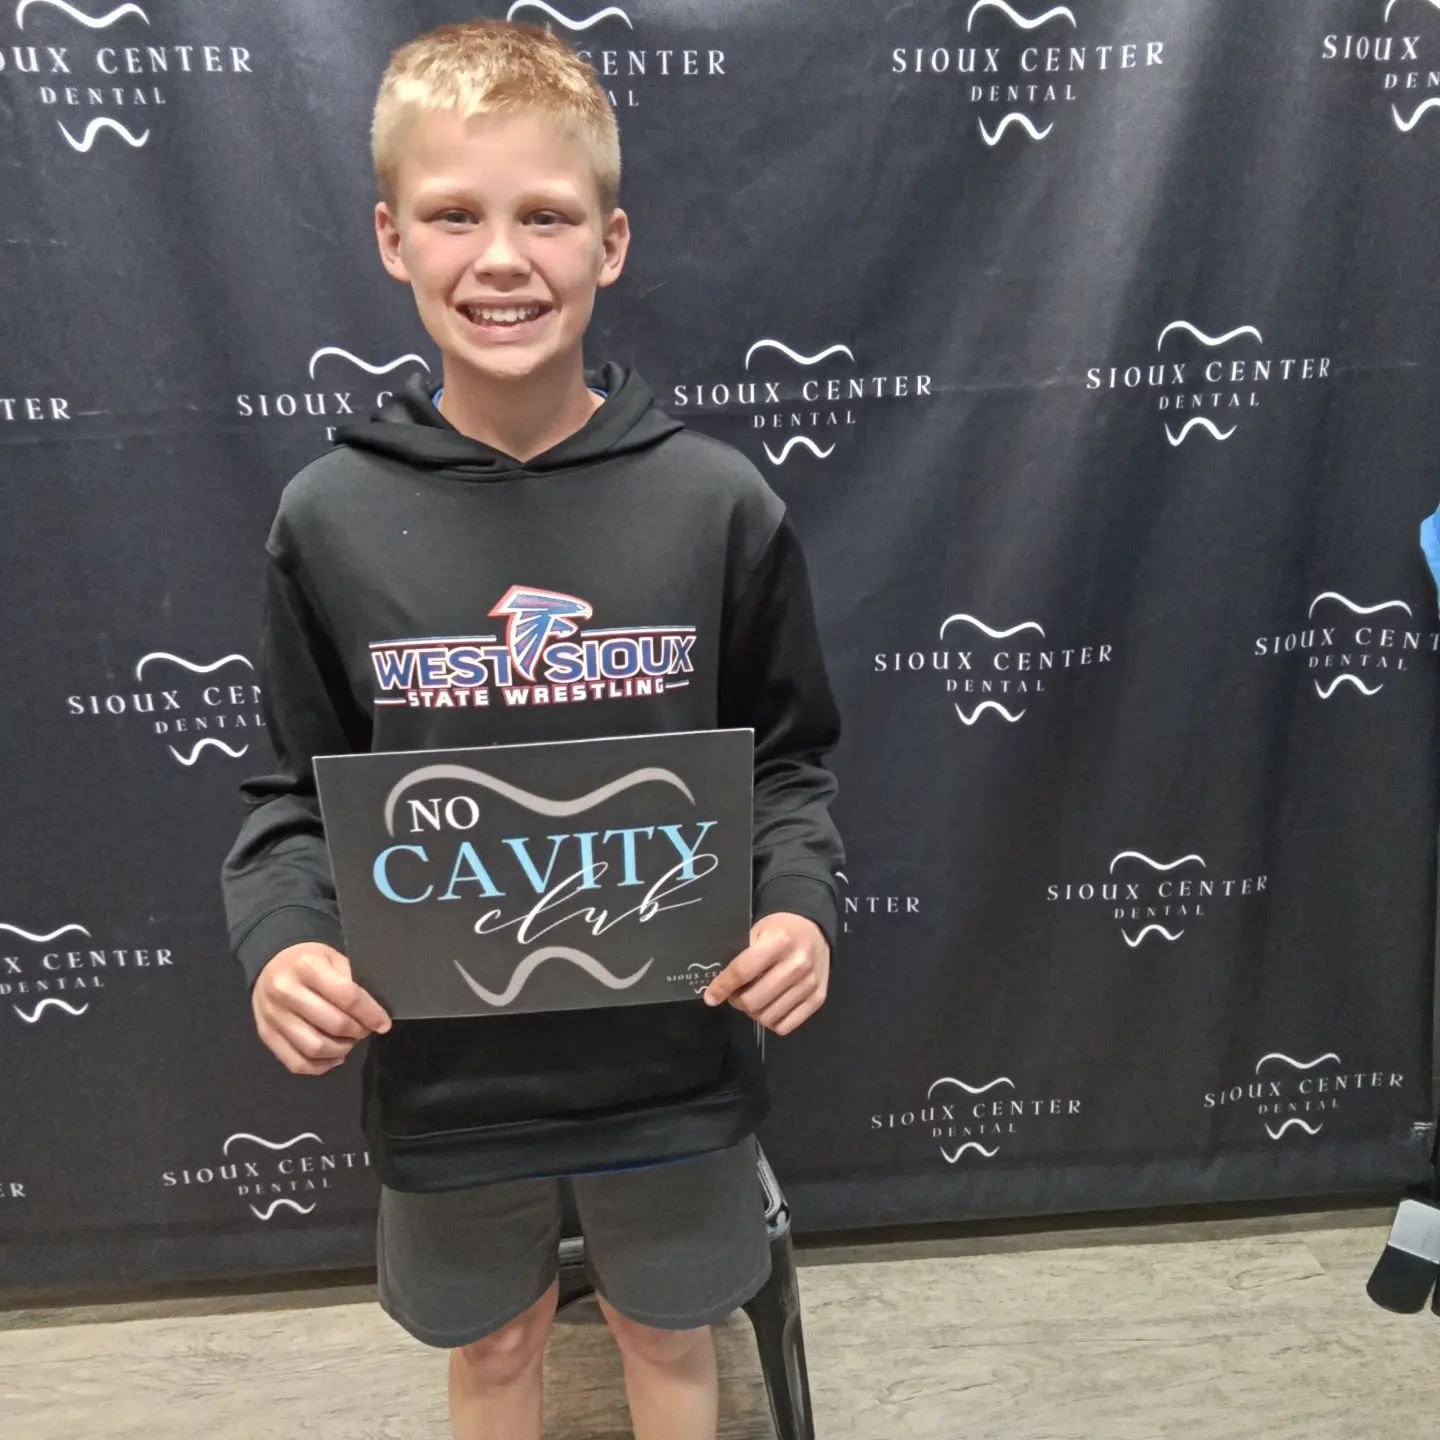 Here's our recent ✨️No Cavity Club✨️ kids! Congrats to William, Kaelen, and DeMarkus on having great checkups! Keep up the great brushing, everyone! 🦷🪥😁
.
.
.
#siouxcenterdental 
#faithfamilyservice 
#generaldentist 
#nocavityclub 
#siouxcenterden